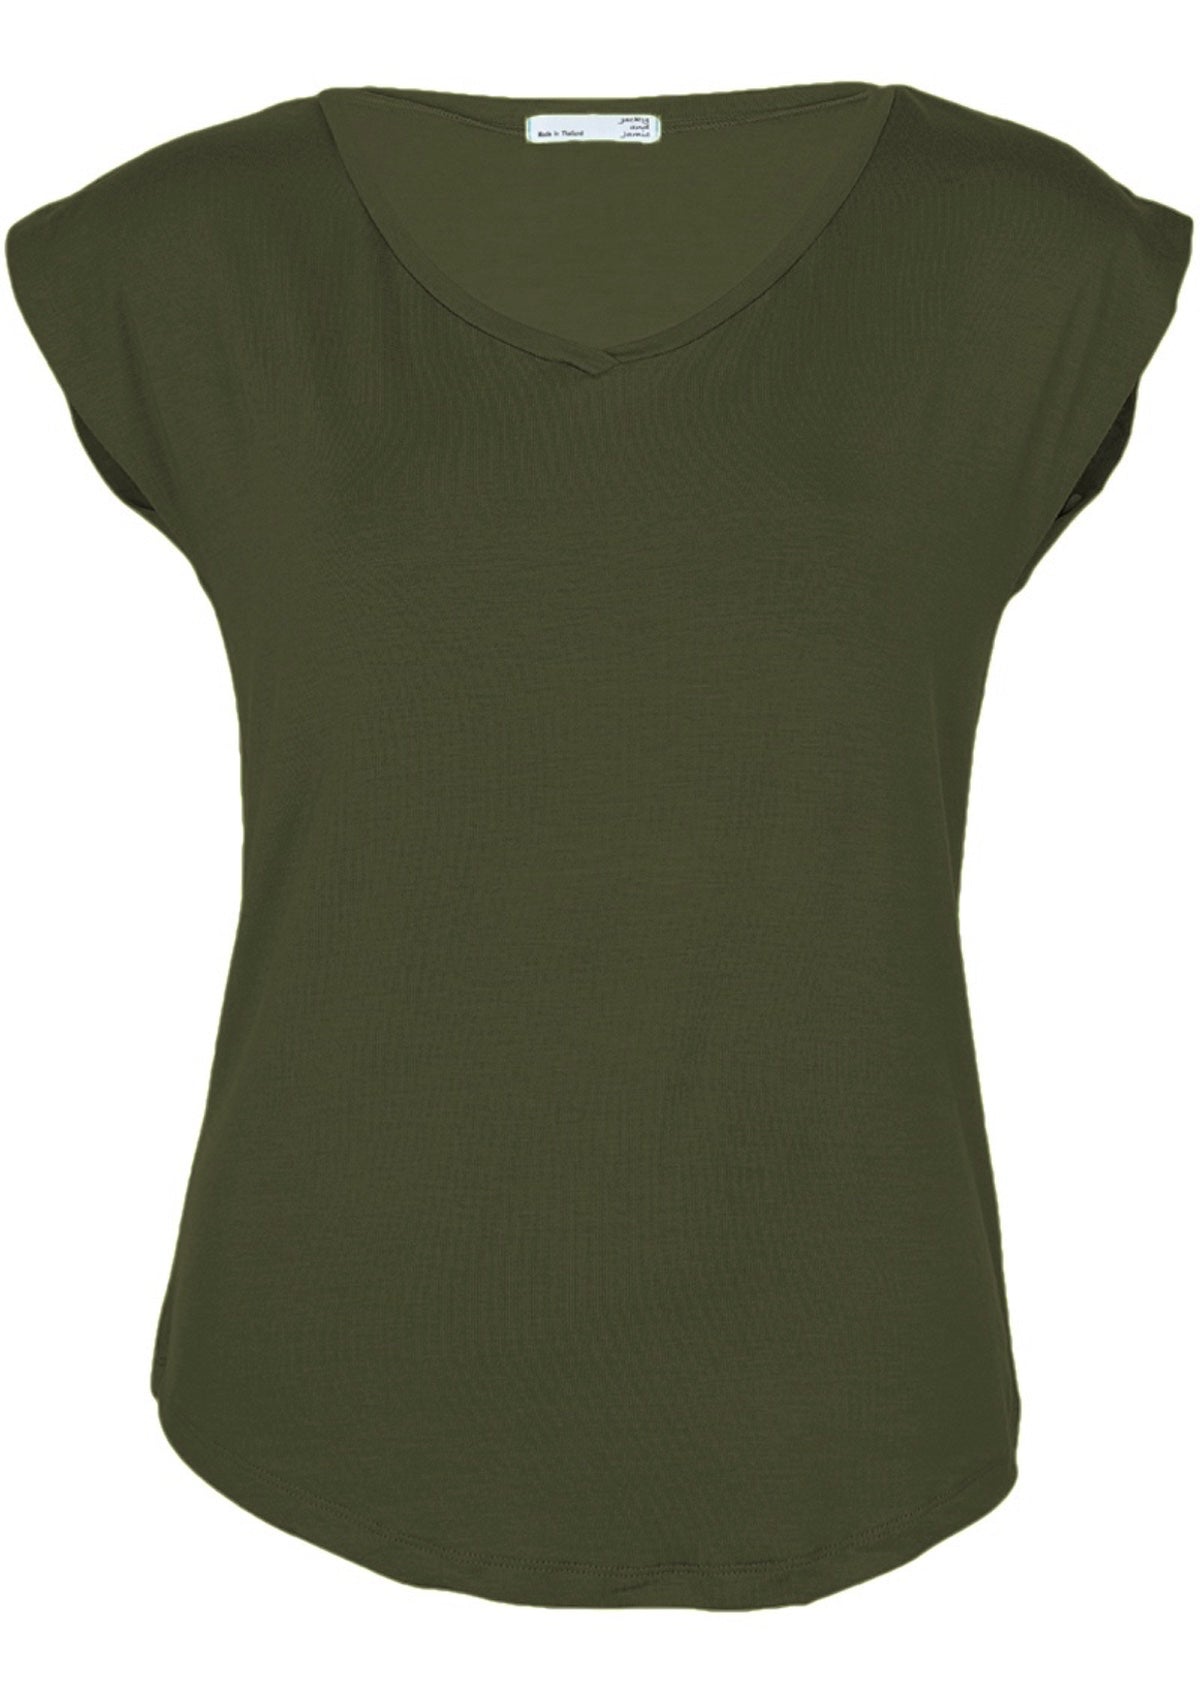 Front view of a women's olive green v-neck short cap sleeve rayon top